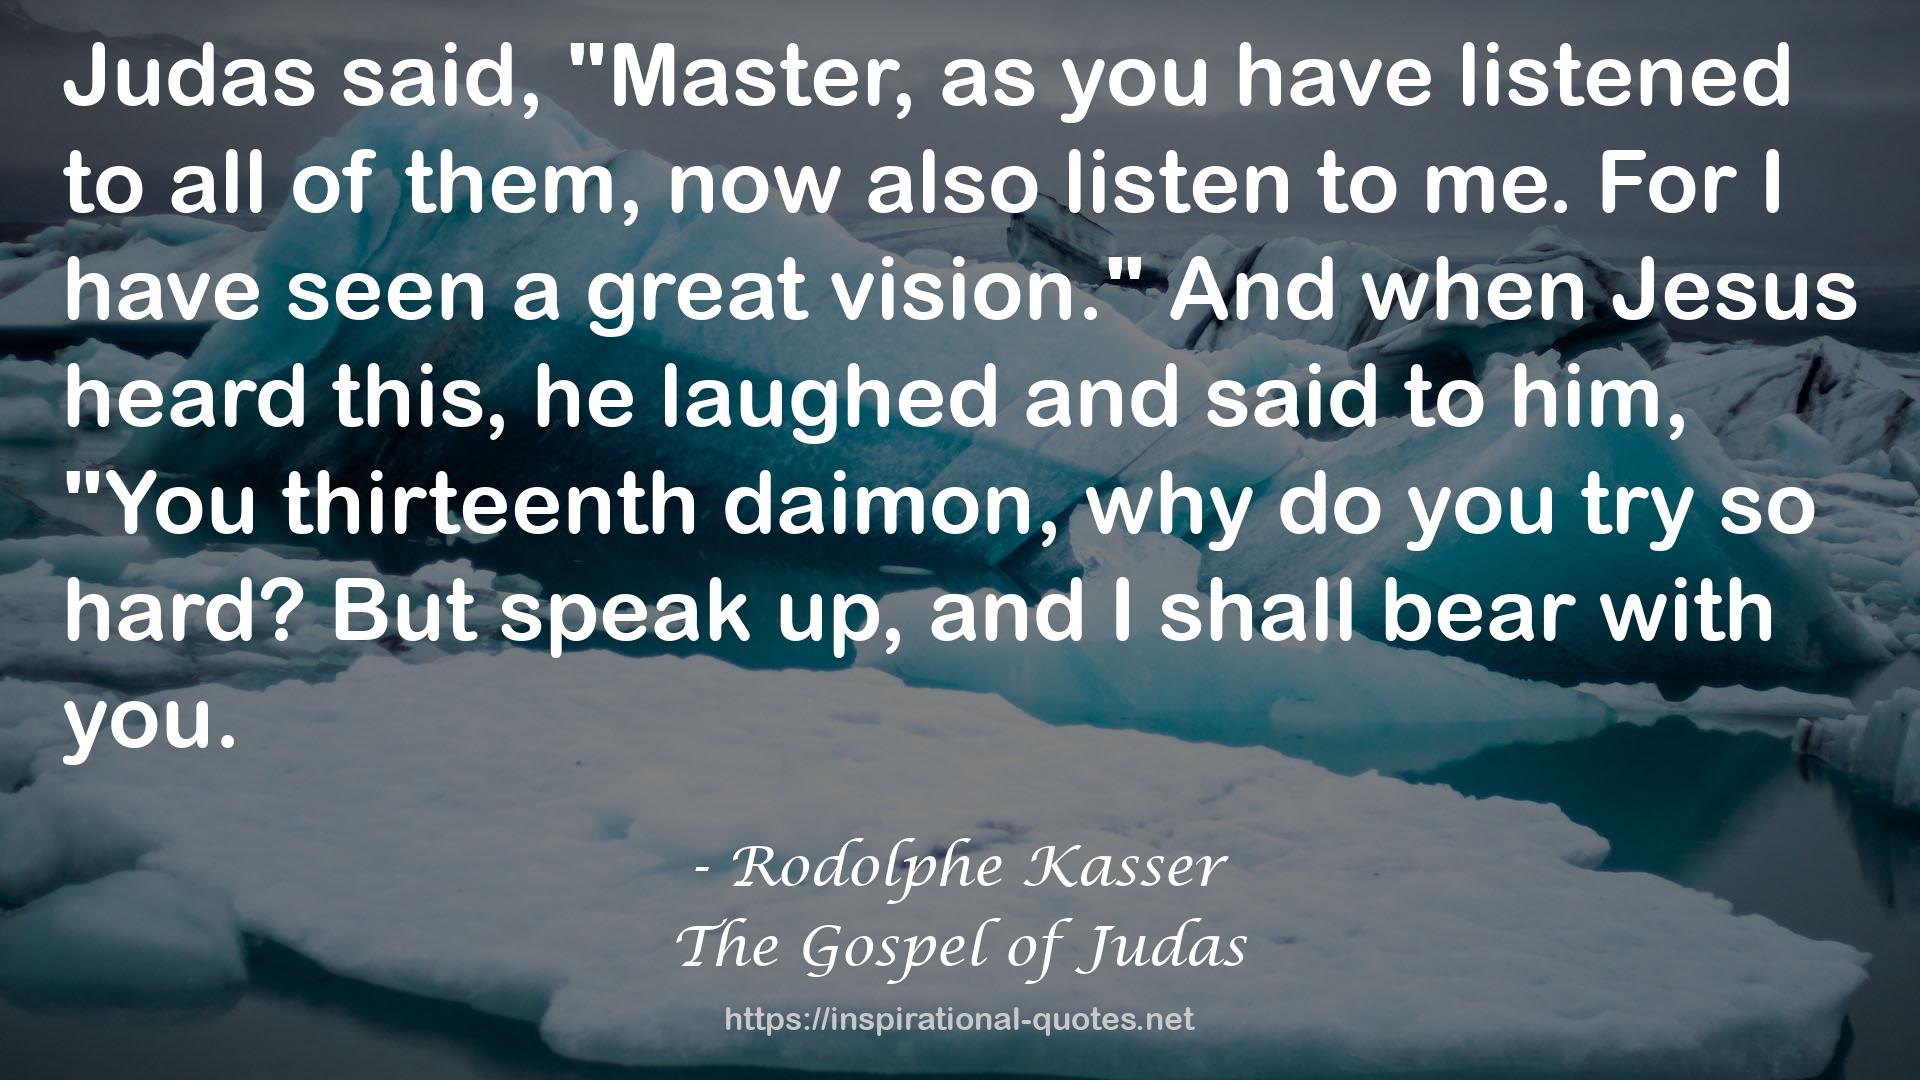 Rodolphe Kasser QUOTES